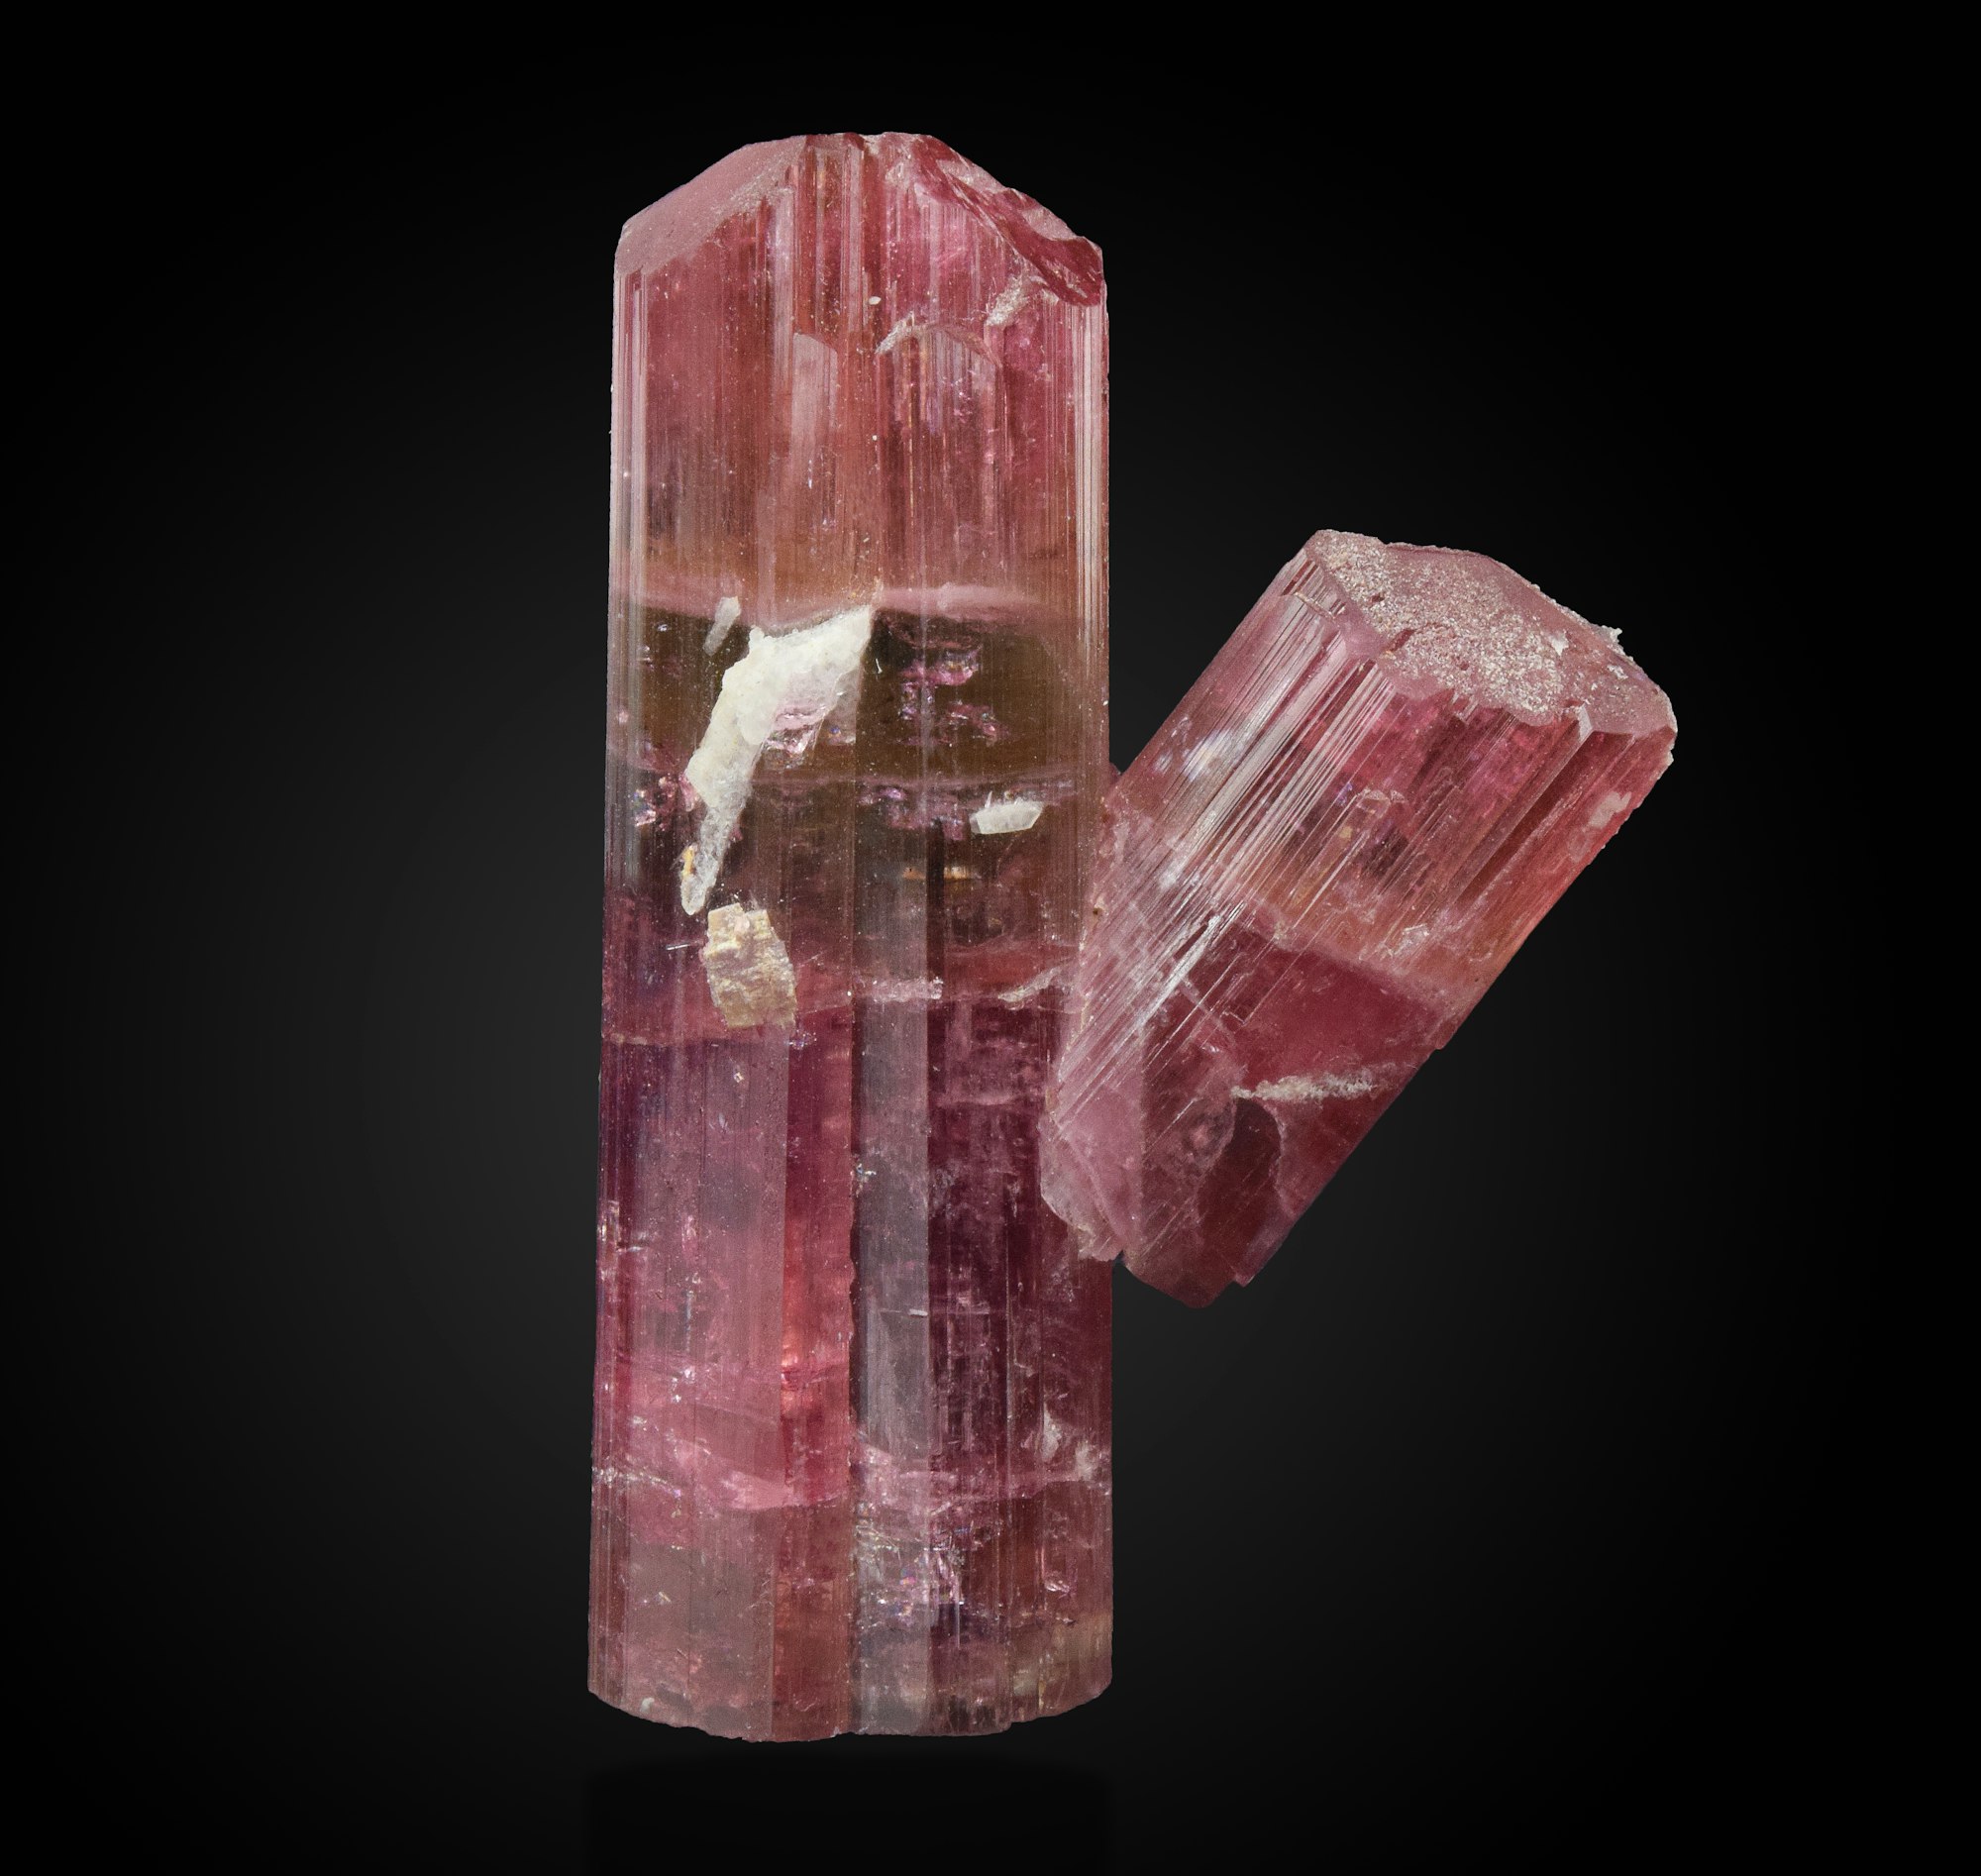 Elbaite is one of the best-known members of the tourmaline mineral family, particularly for its high-quality gemstones.